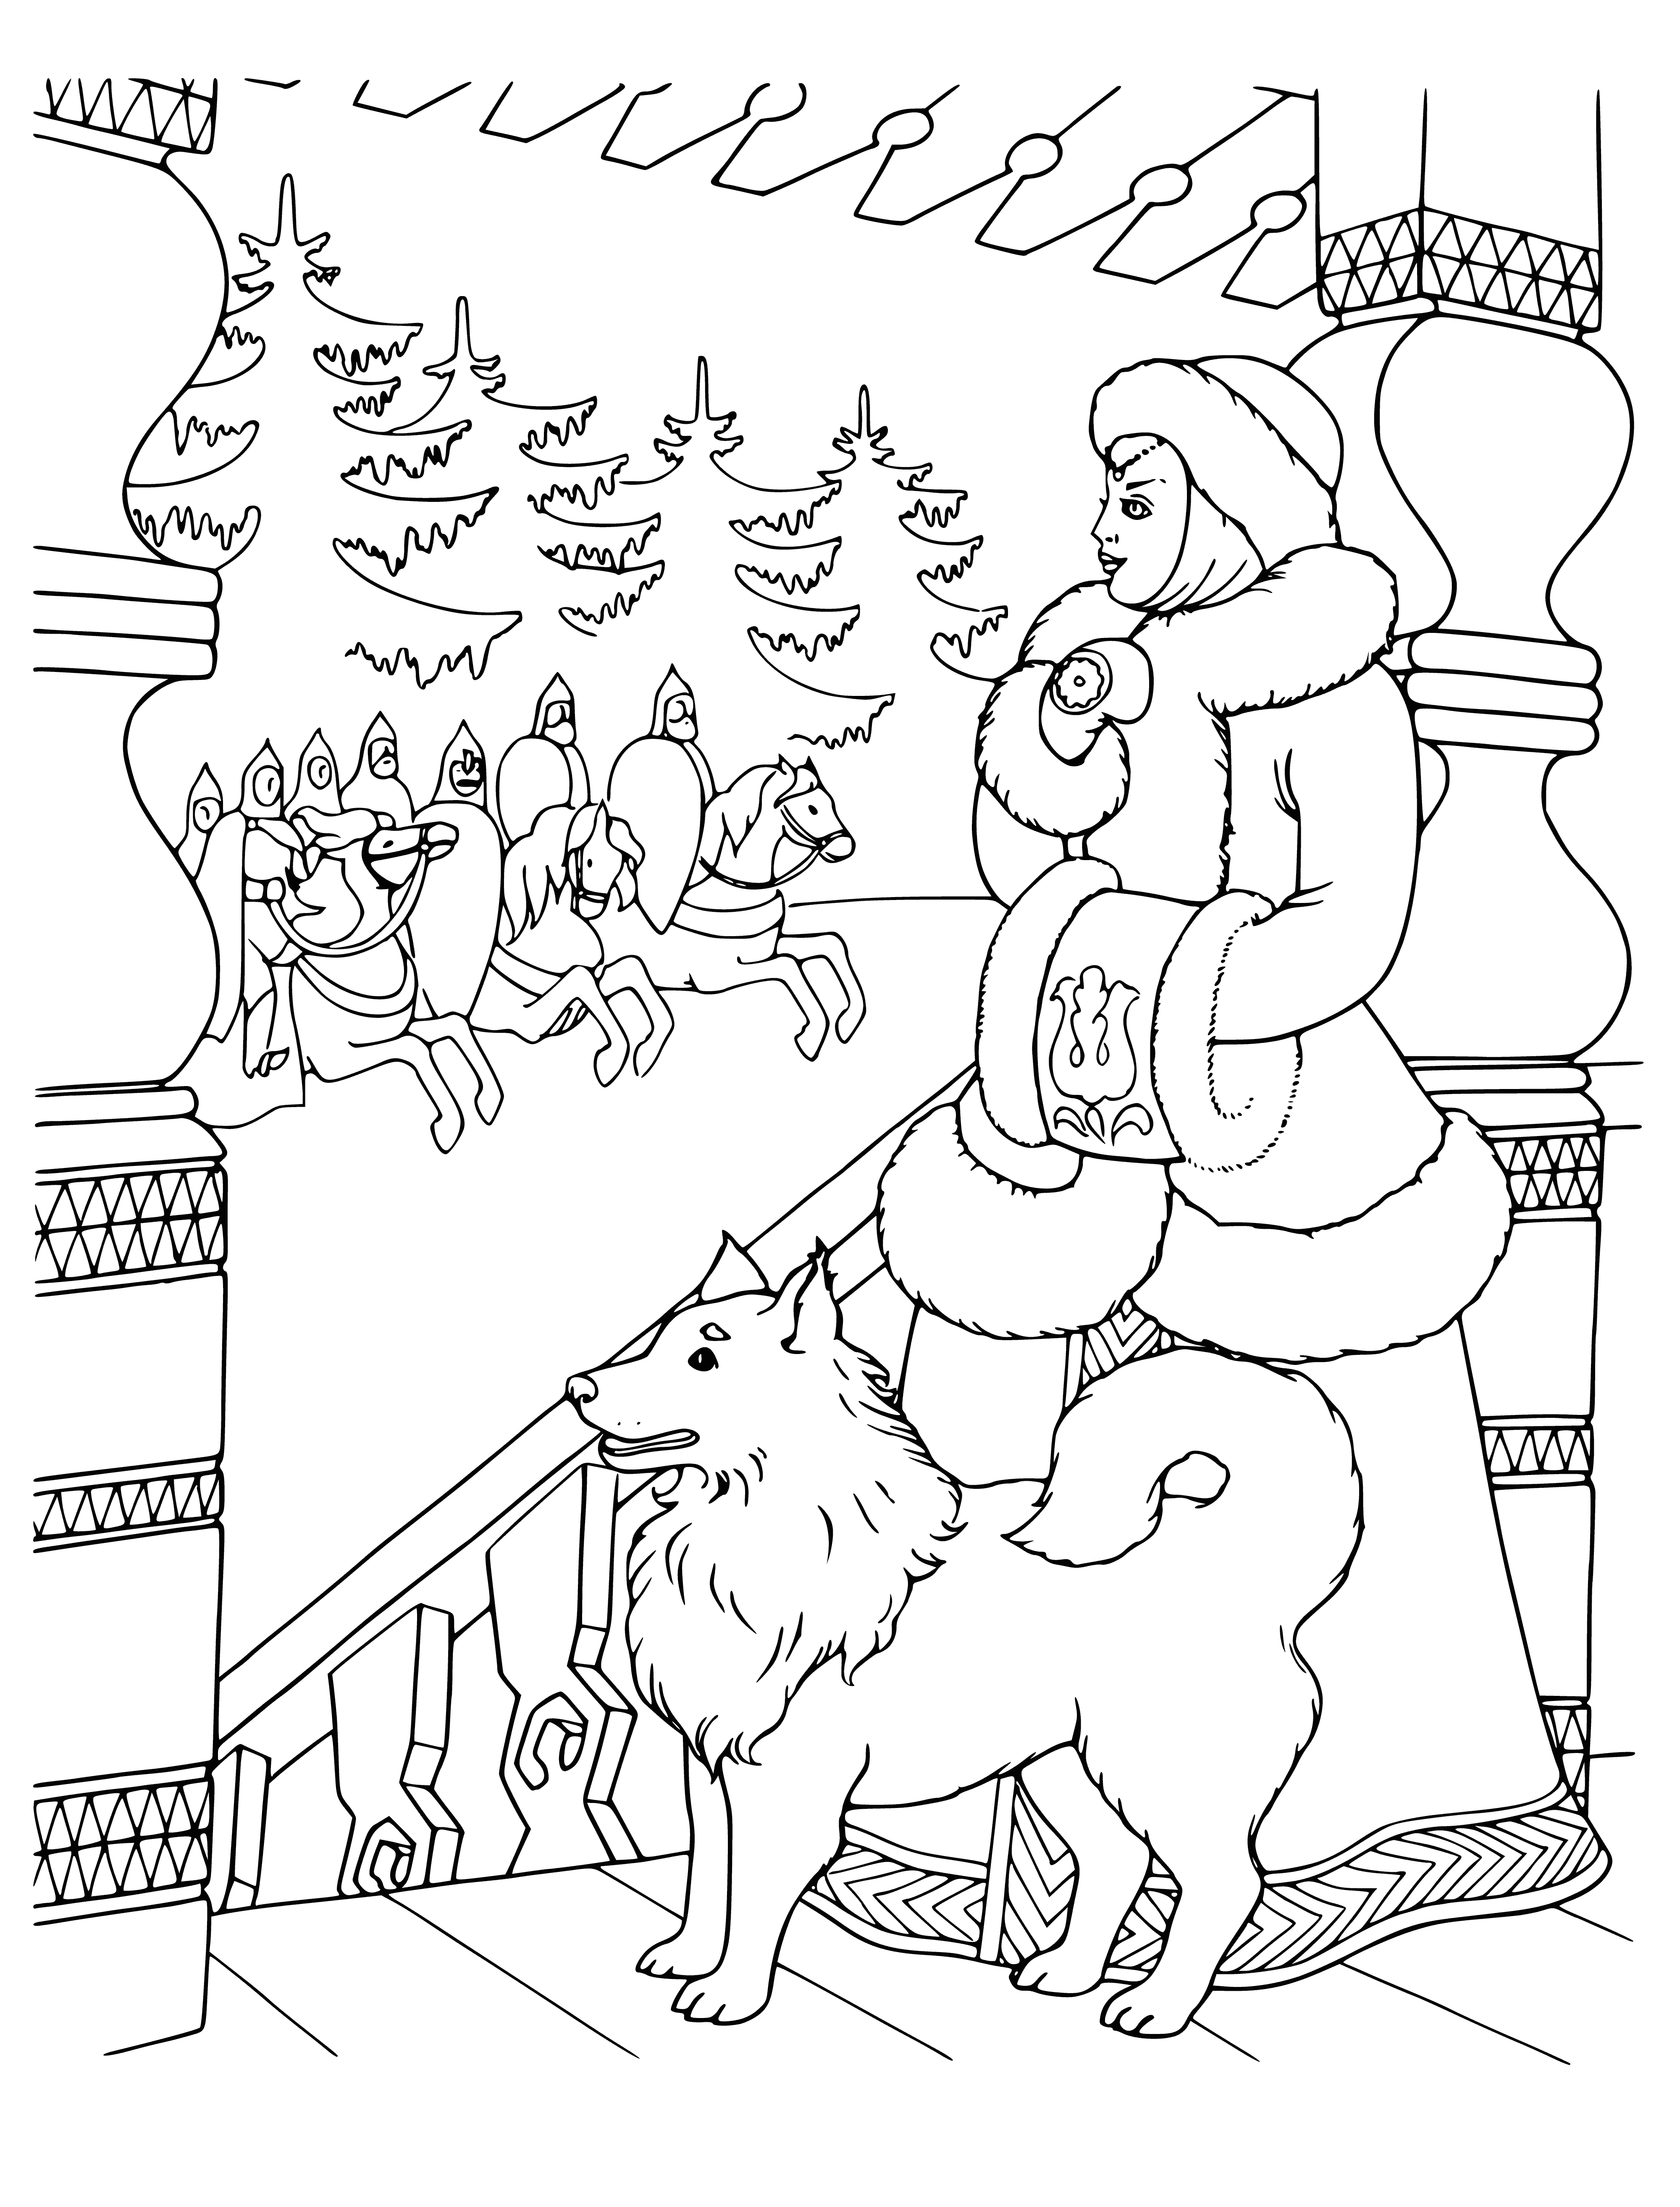 coloring page: Fairytale Princess rescued by 2 heroic brothers in a beautiful countryside. She's grateful and relieved! #russiansfables #coloringpages